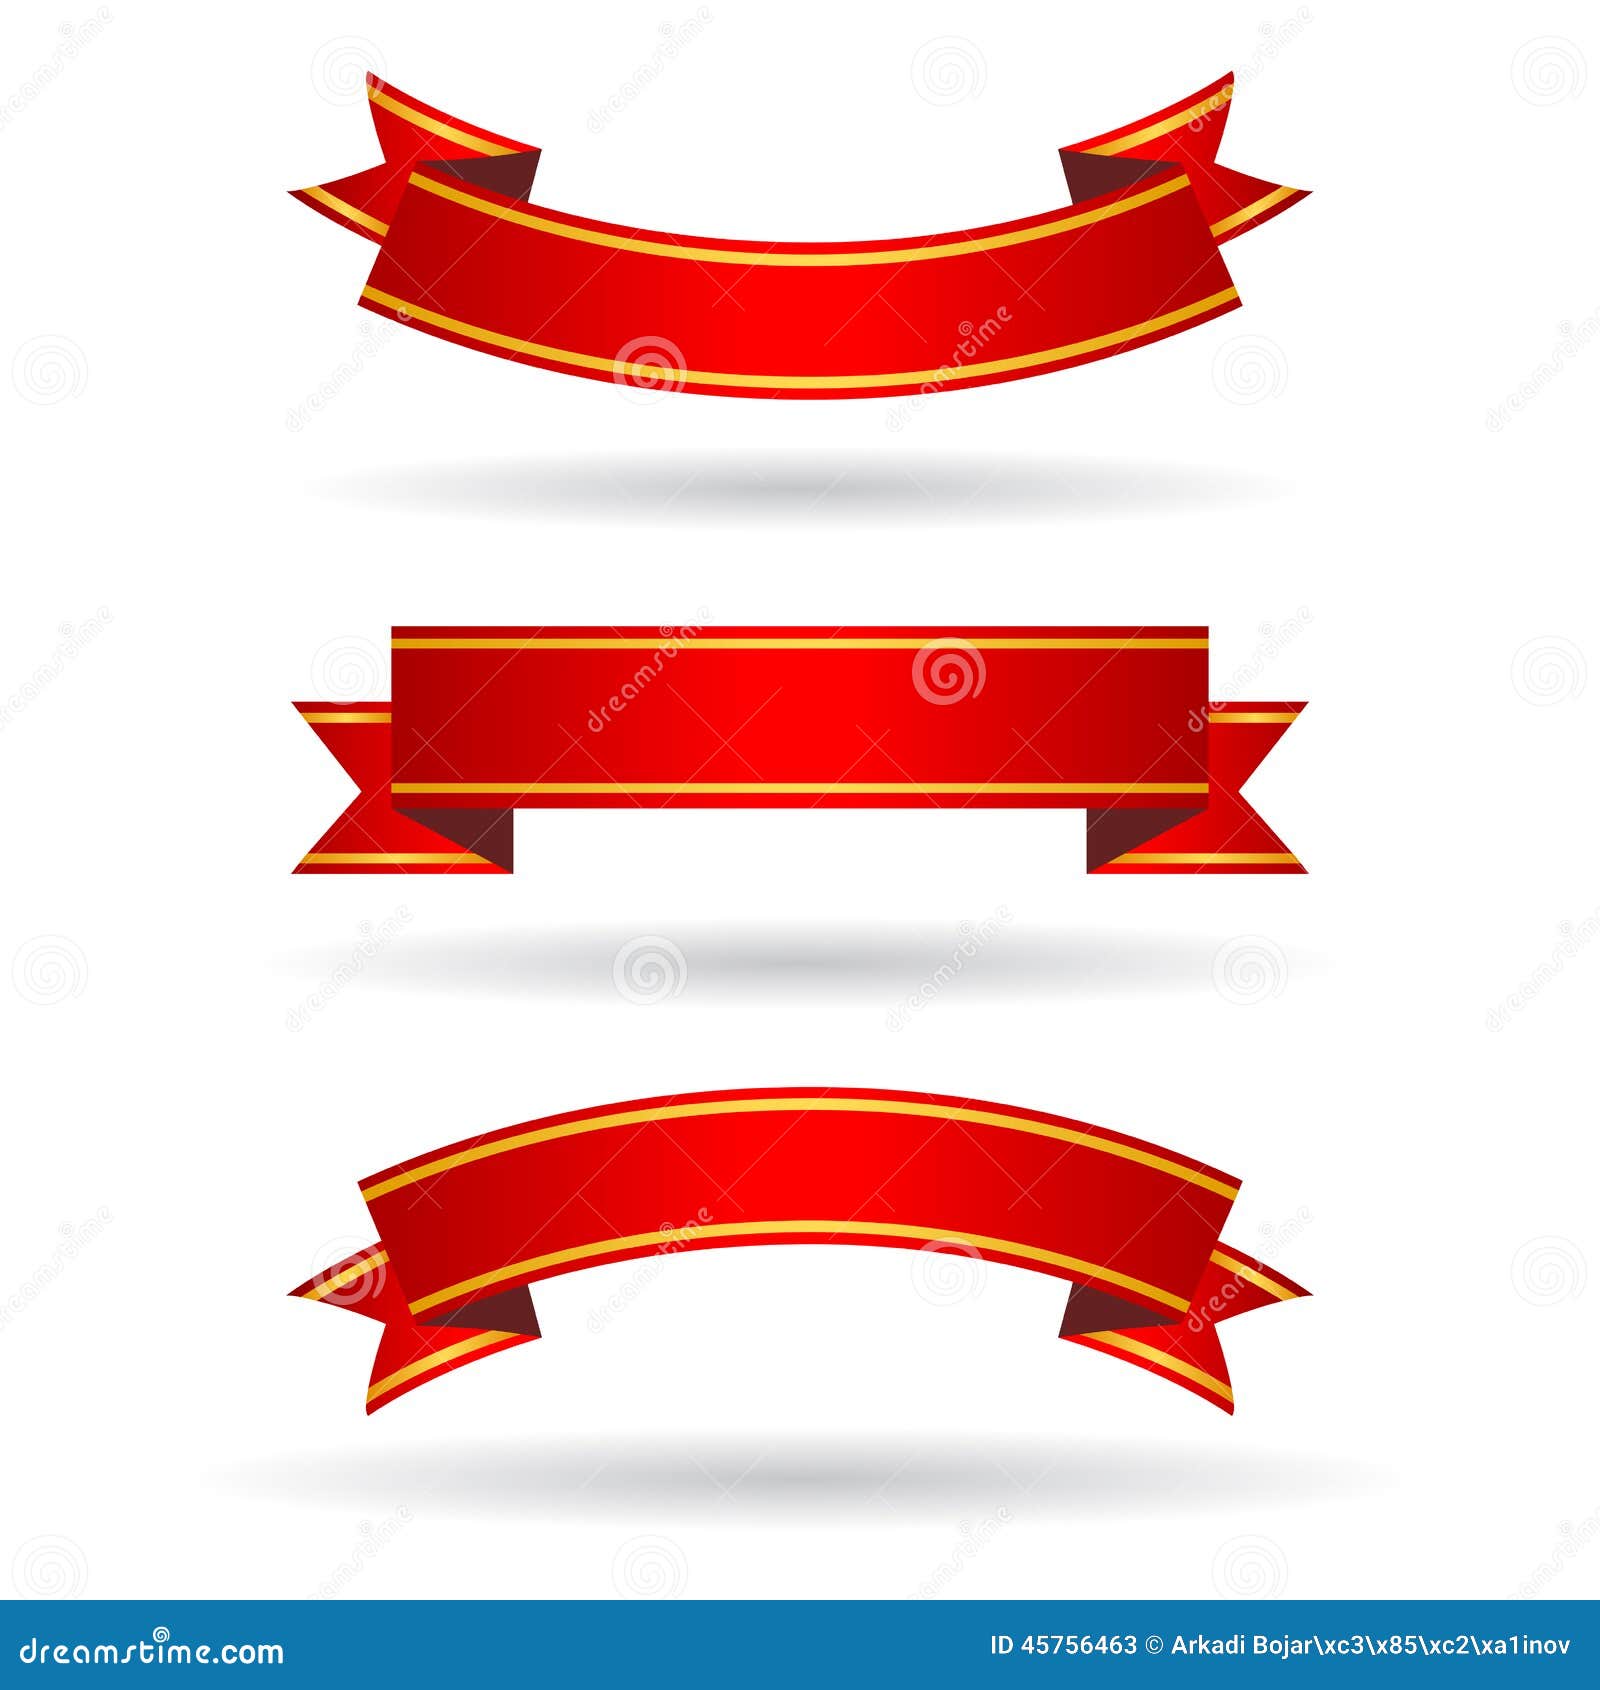 Red banners stock vector. Illustration of leader, ribbon - 45756463